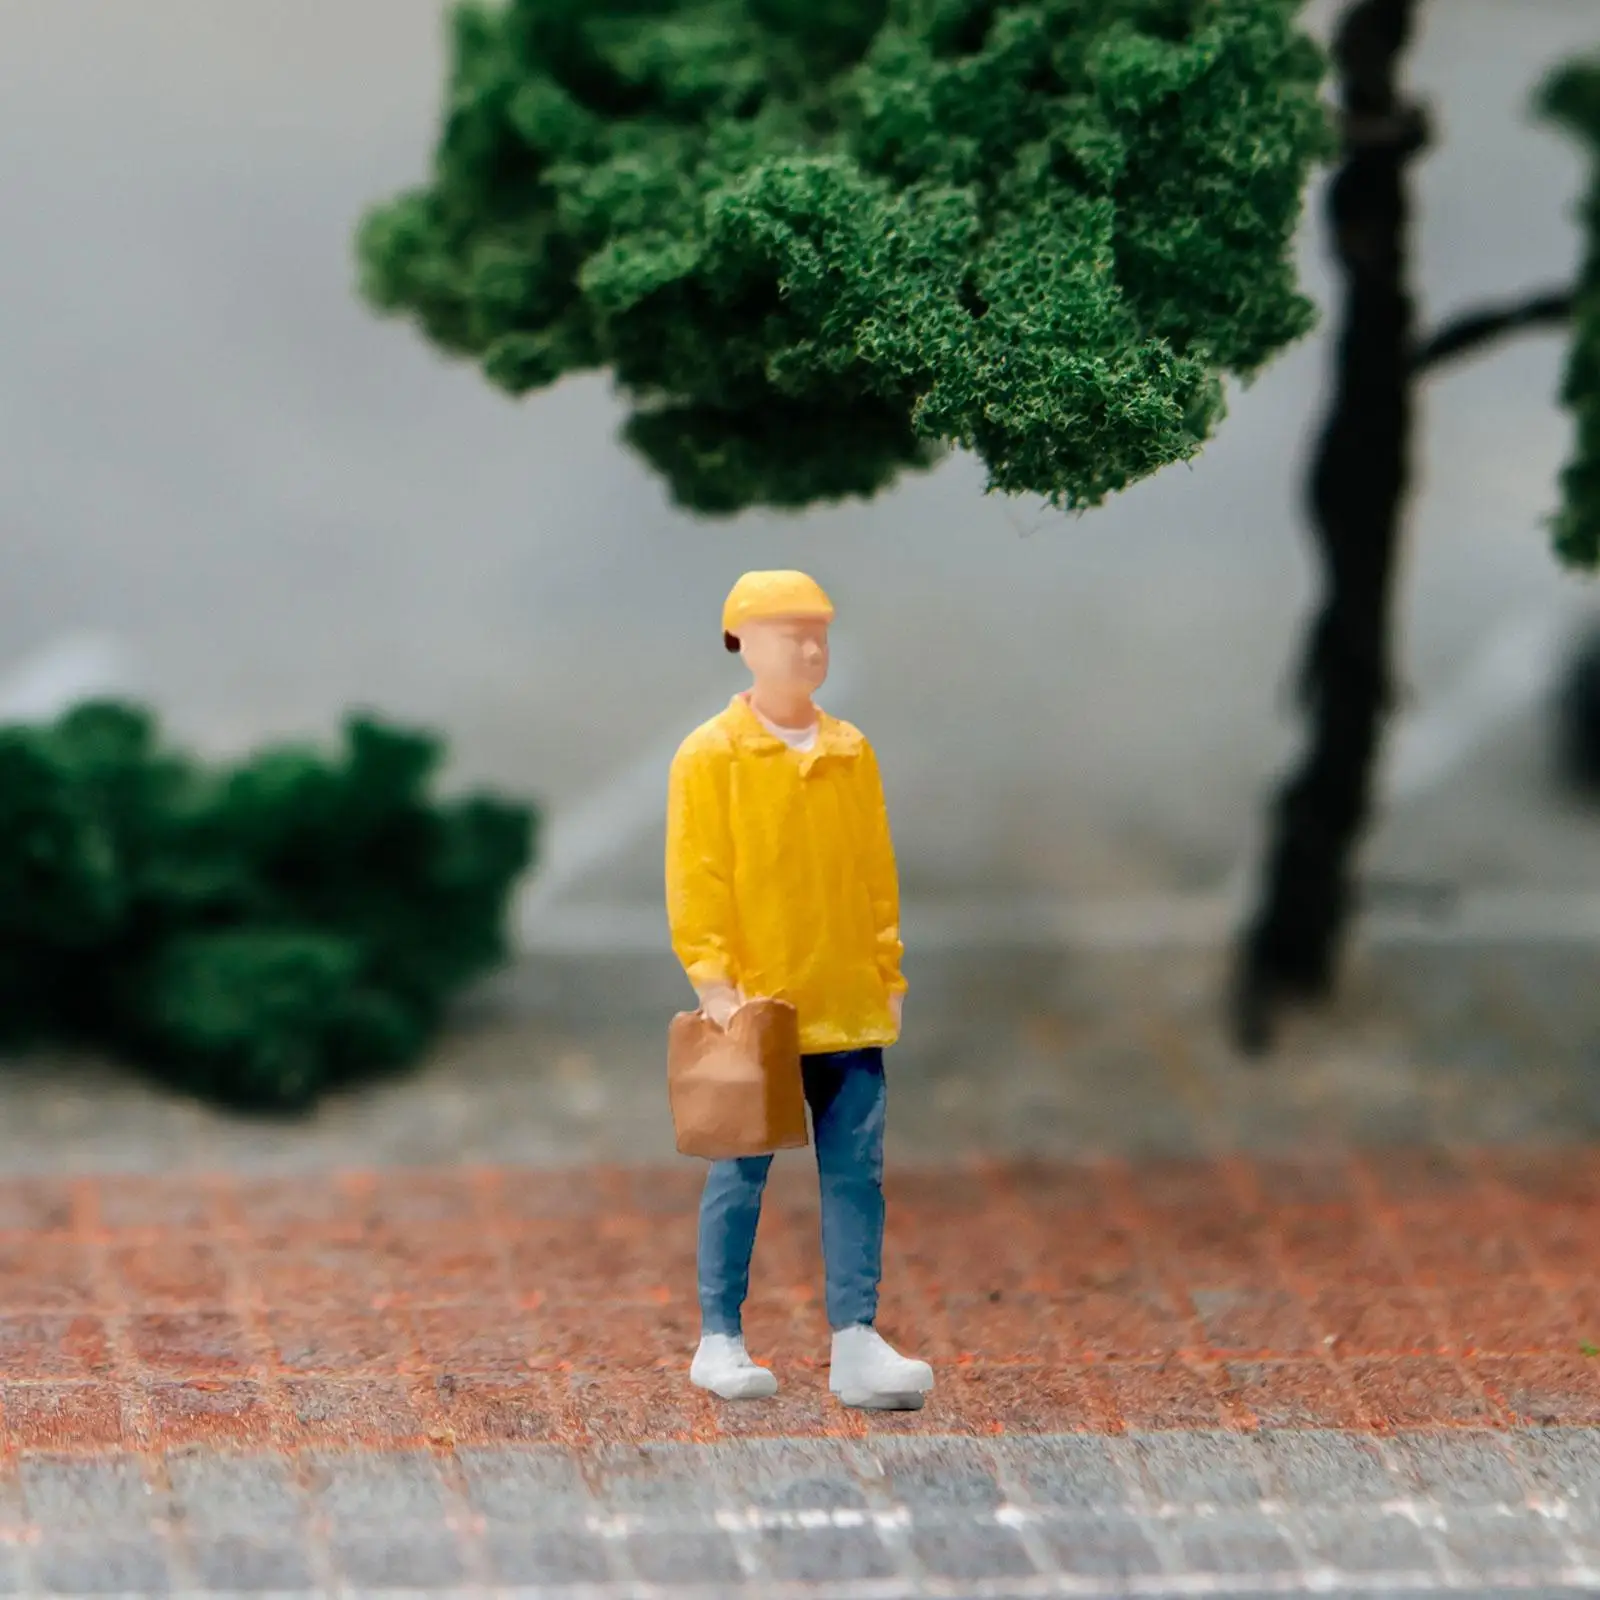 1/64 Scale People Figures Resin Miniature People Figurines for Diorama Micro Landscapes Dollhouse Photography Props Accessories